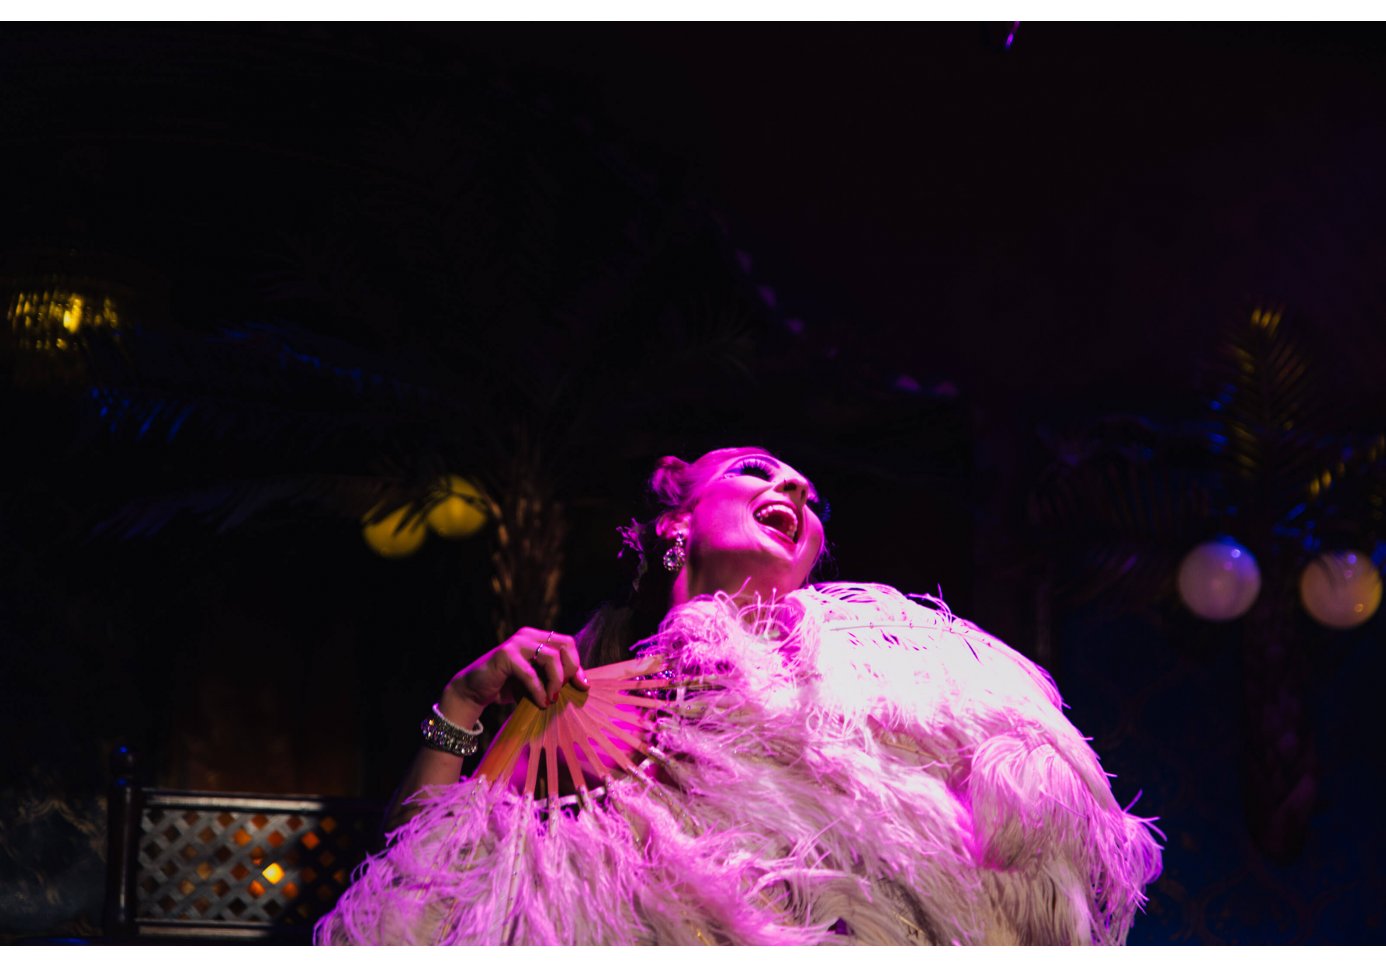 a drag performer laughing on stage holding a huge feathered hand fan.